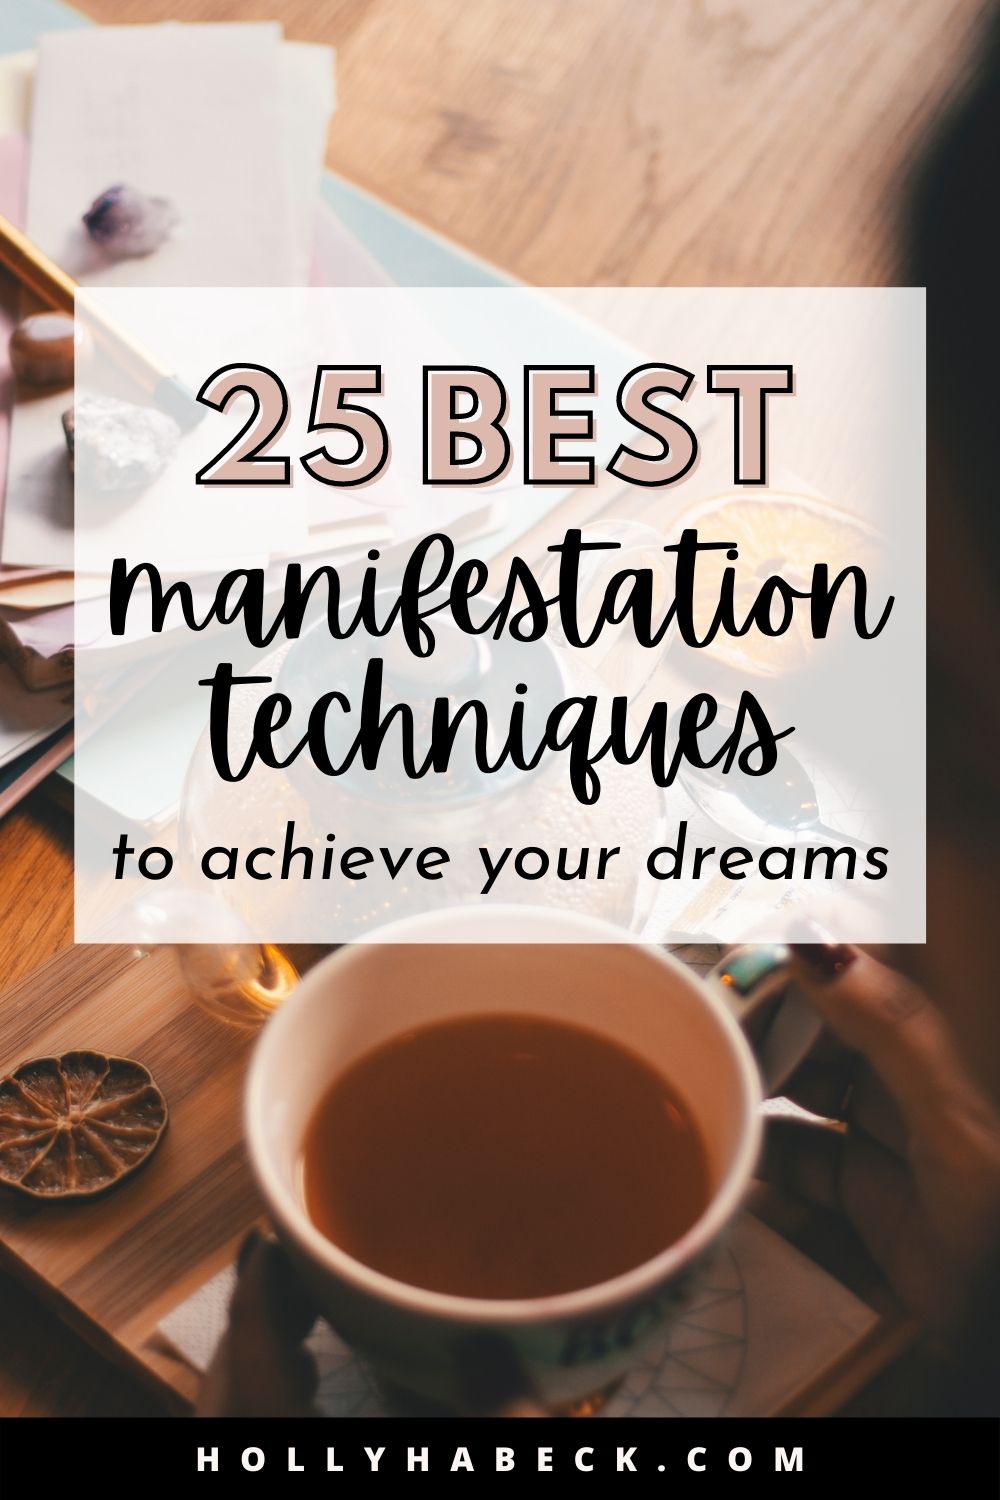 How to Manifest Something [With The 25 Most Powerful Manifestation Methods]